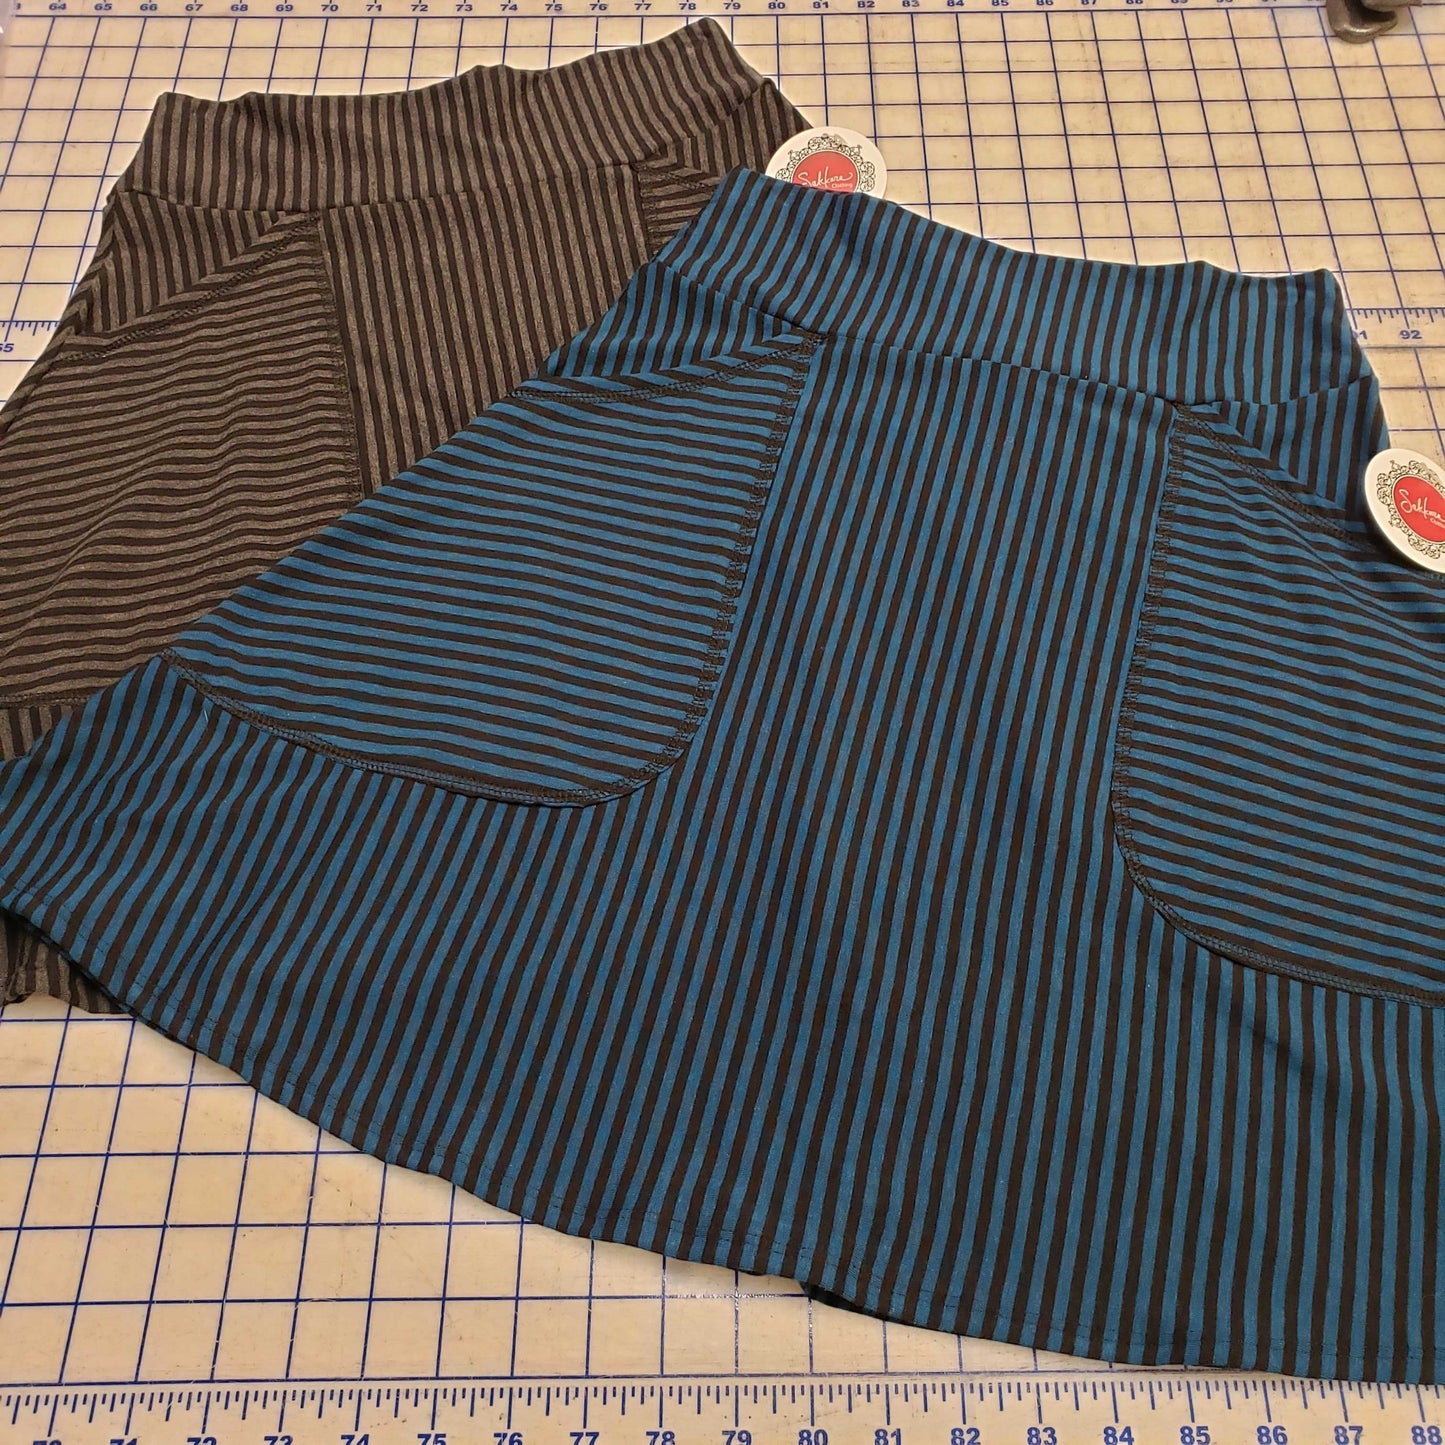 Striped skirt with large pockets.